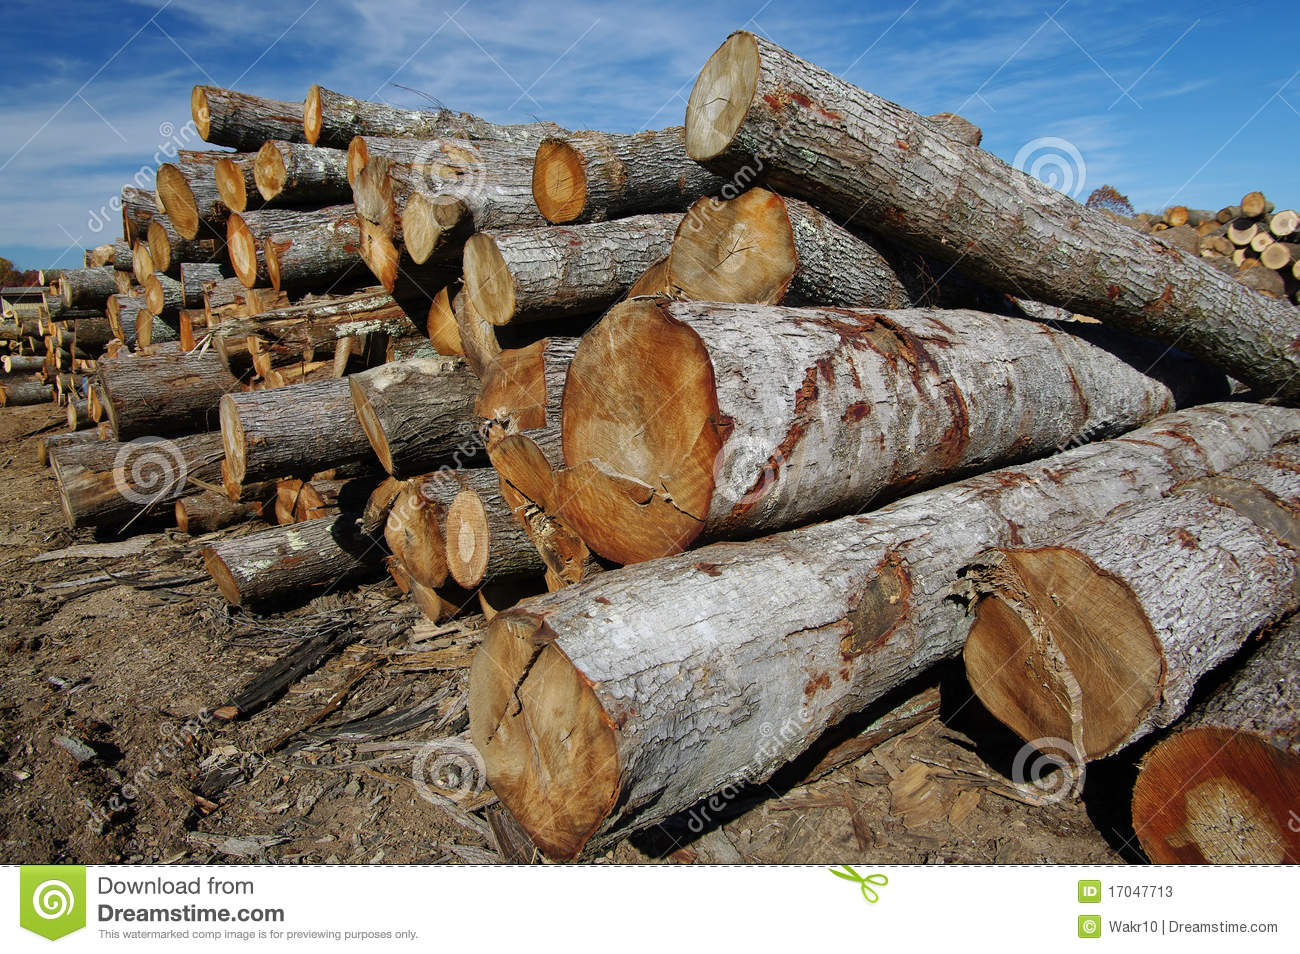 Logs Stacked High In Long Rows Await Cutting And Finishing At A